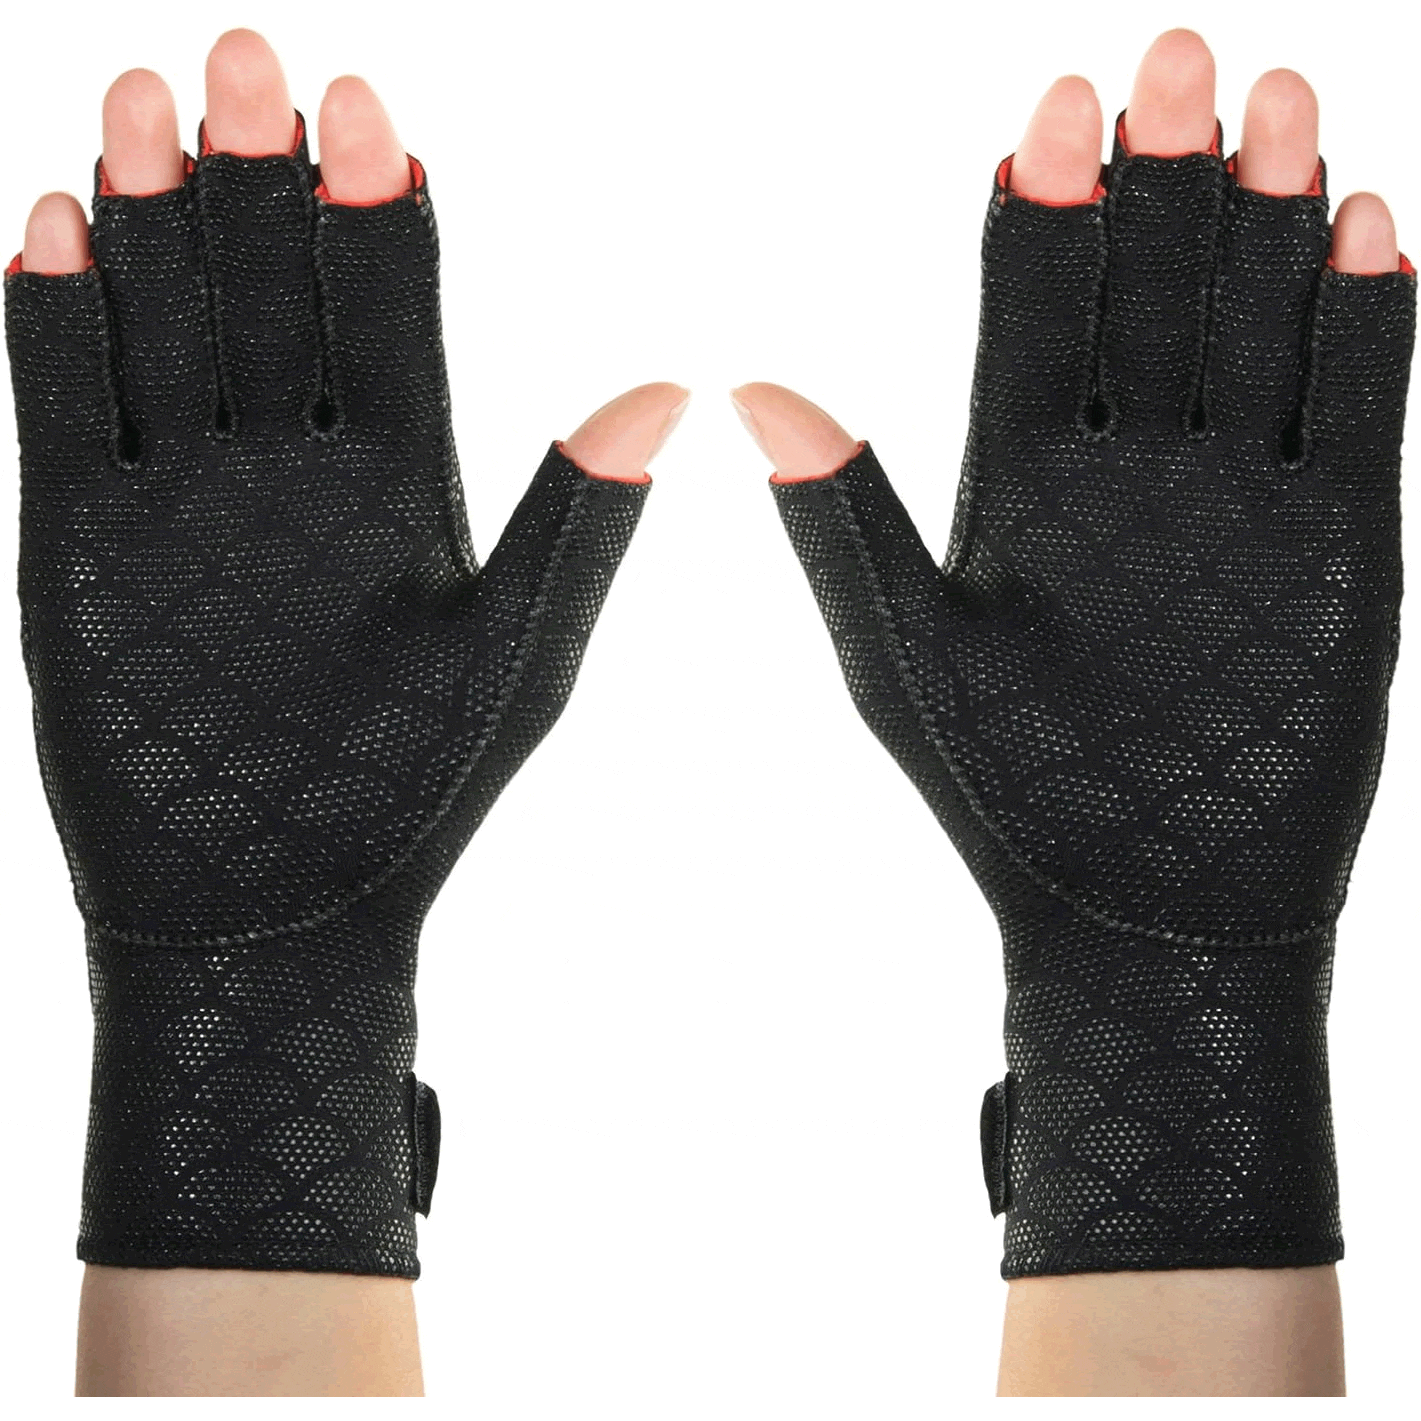 View Thermoskin Thermal Arthritic Gloves Large information